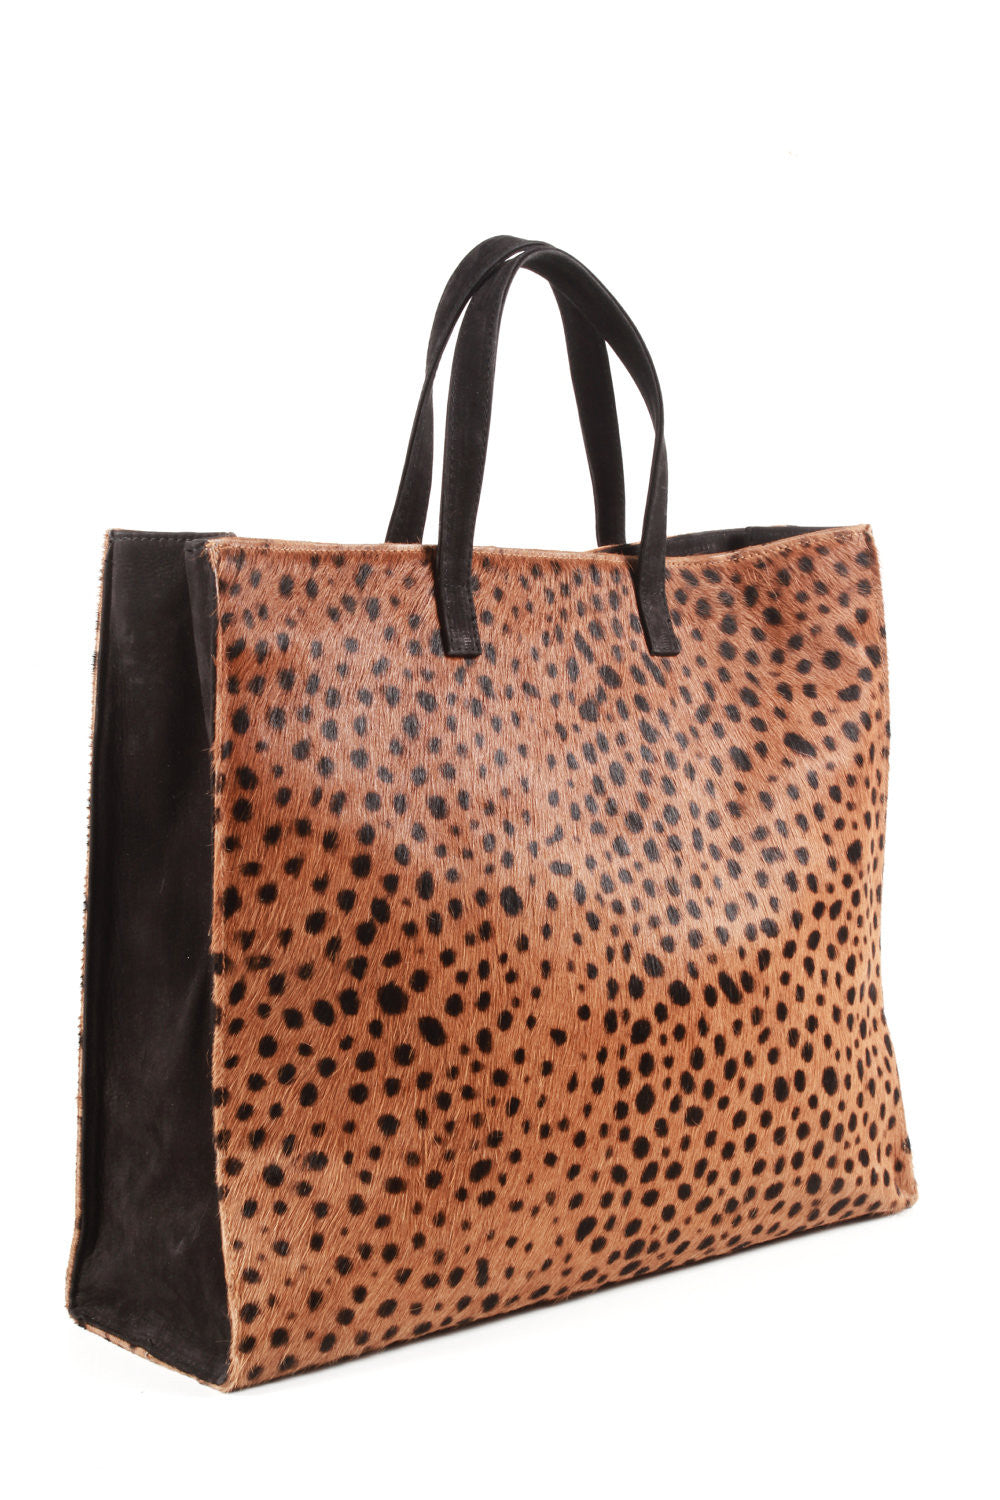 Clare V, Bags, Clare V Leopard Print Suede Tote